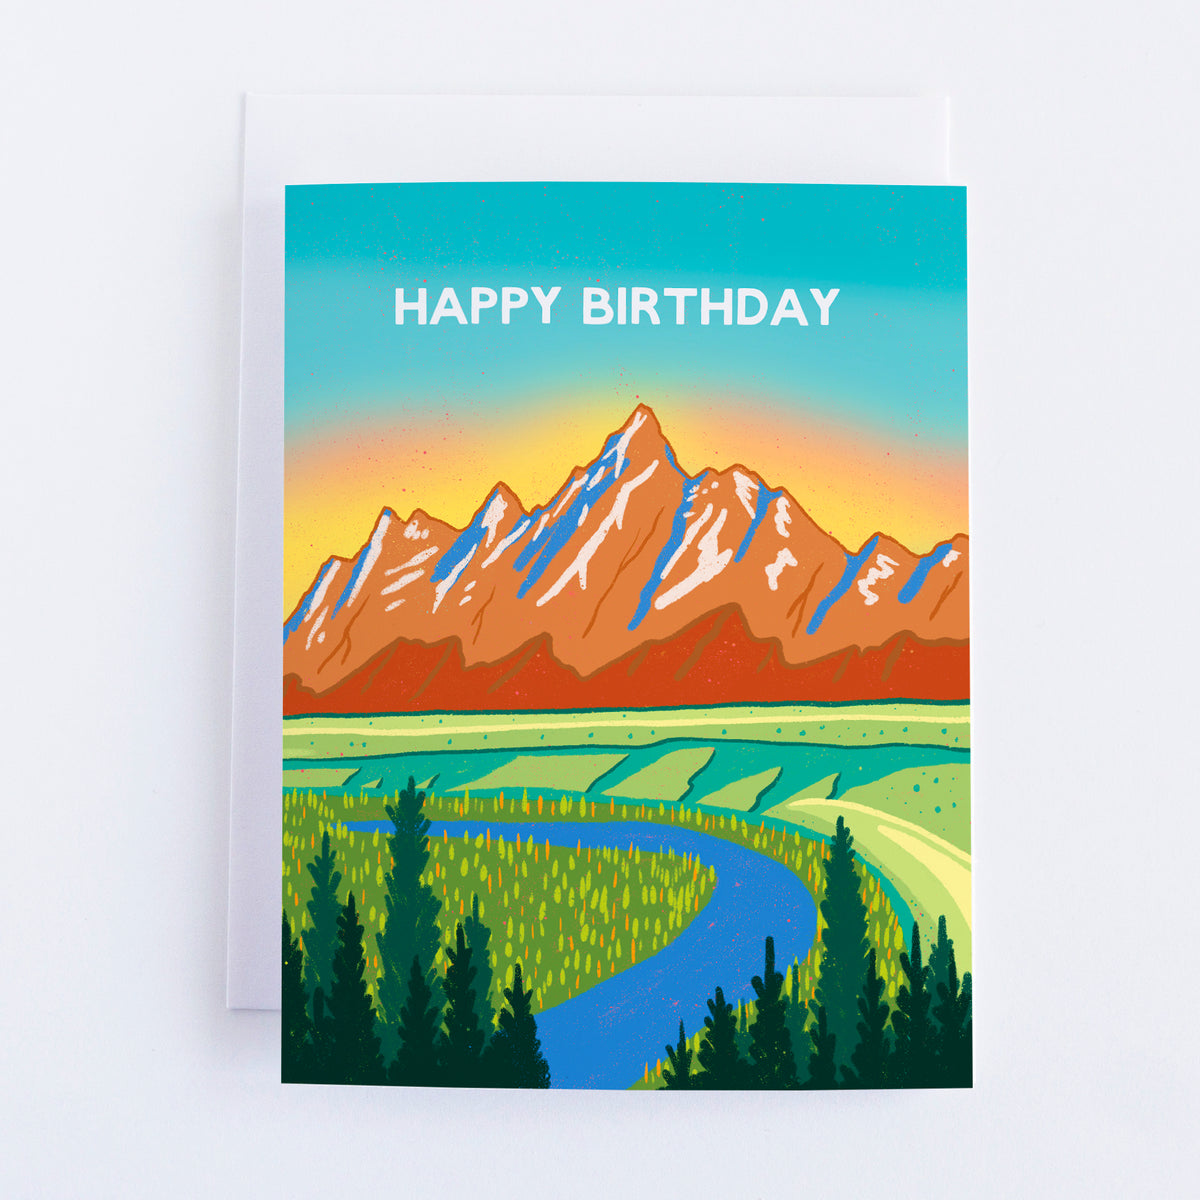 A card with the teton mountains and a blue pink and yellow sky with a river and trees in the foreground. The text says happy birthday in the sky.